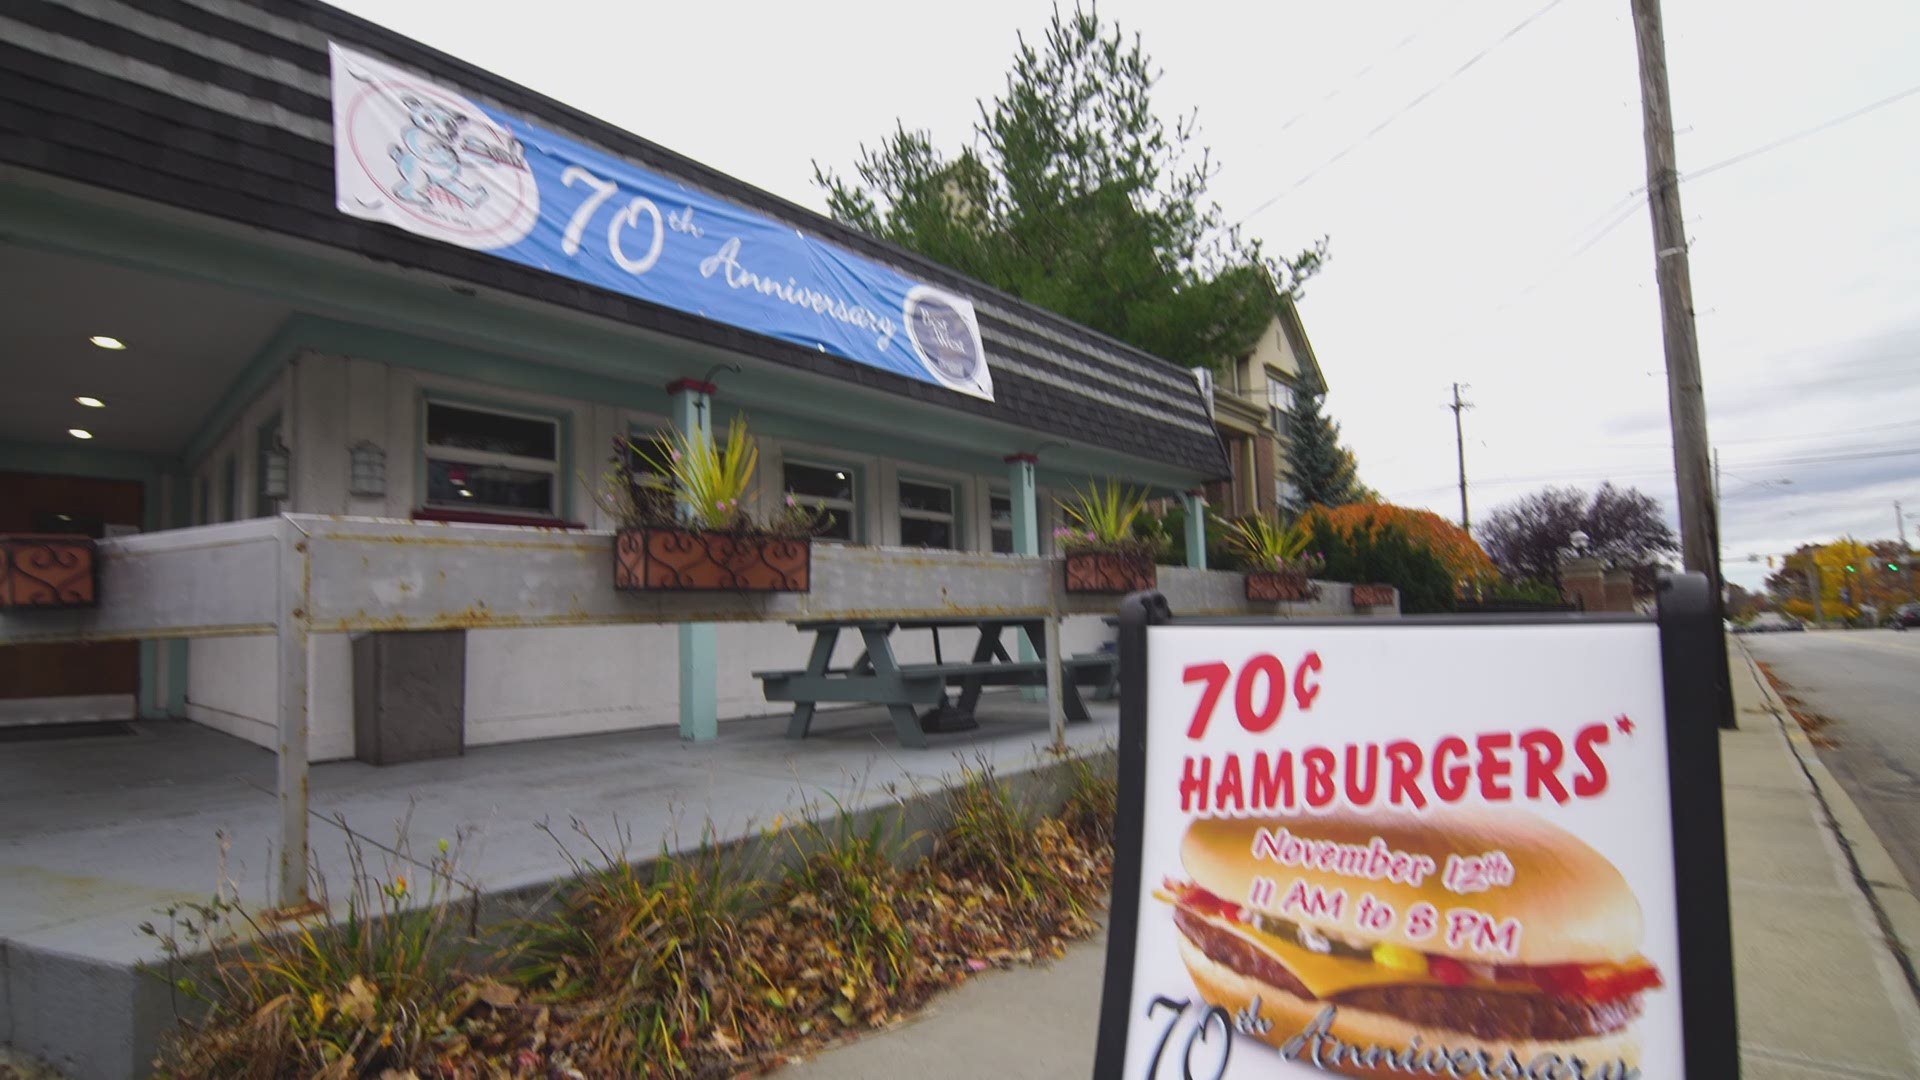 Bearden's Steak Burgers in Rocky River OH will be celebrating their 70th anniversary on November 12th 2018 with 70 cent burgers!!